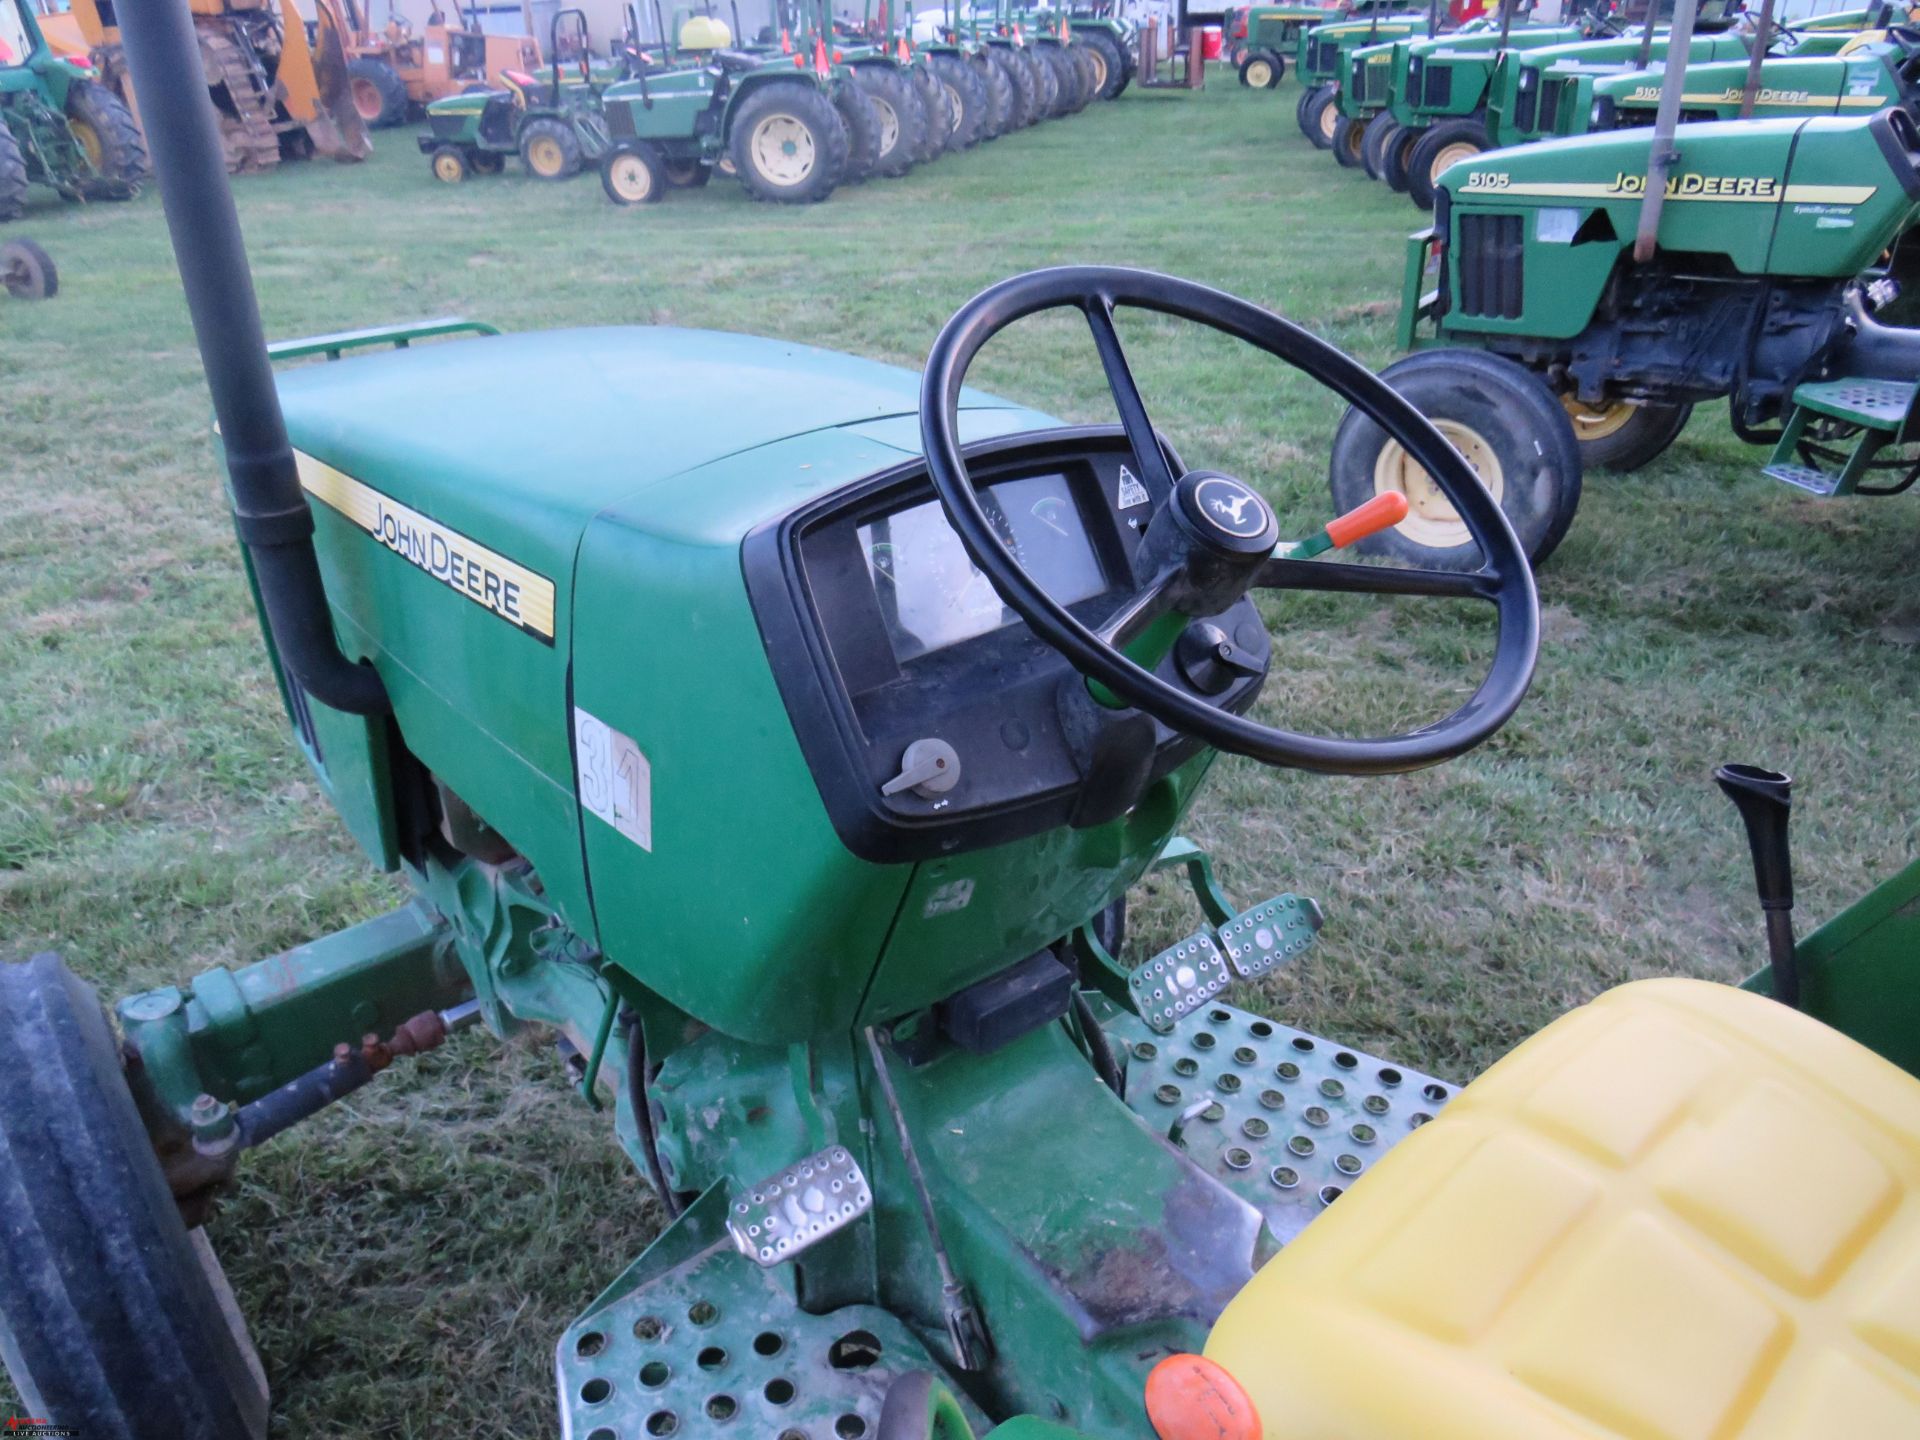 2007 JOHN DEERE 5103 TRACTOR WITH CANOPY, PTO, NO 3PT, 13.6-28 REAR TIRES, 11036 HOURS SHOWING ( - Image 7 of 8